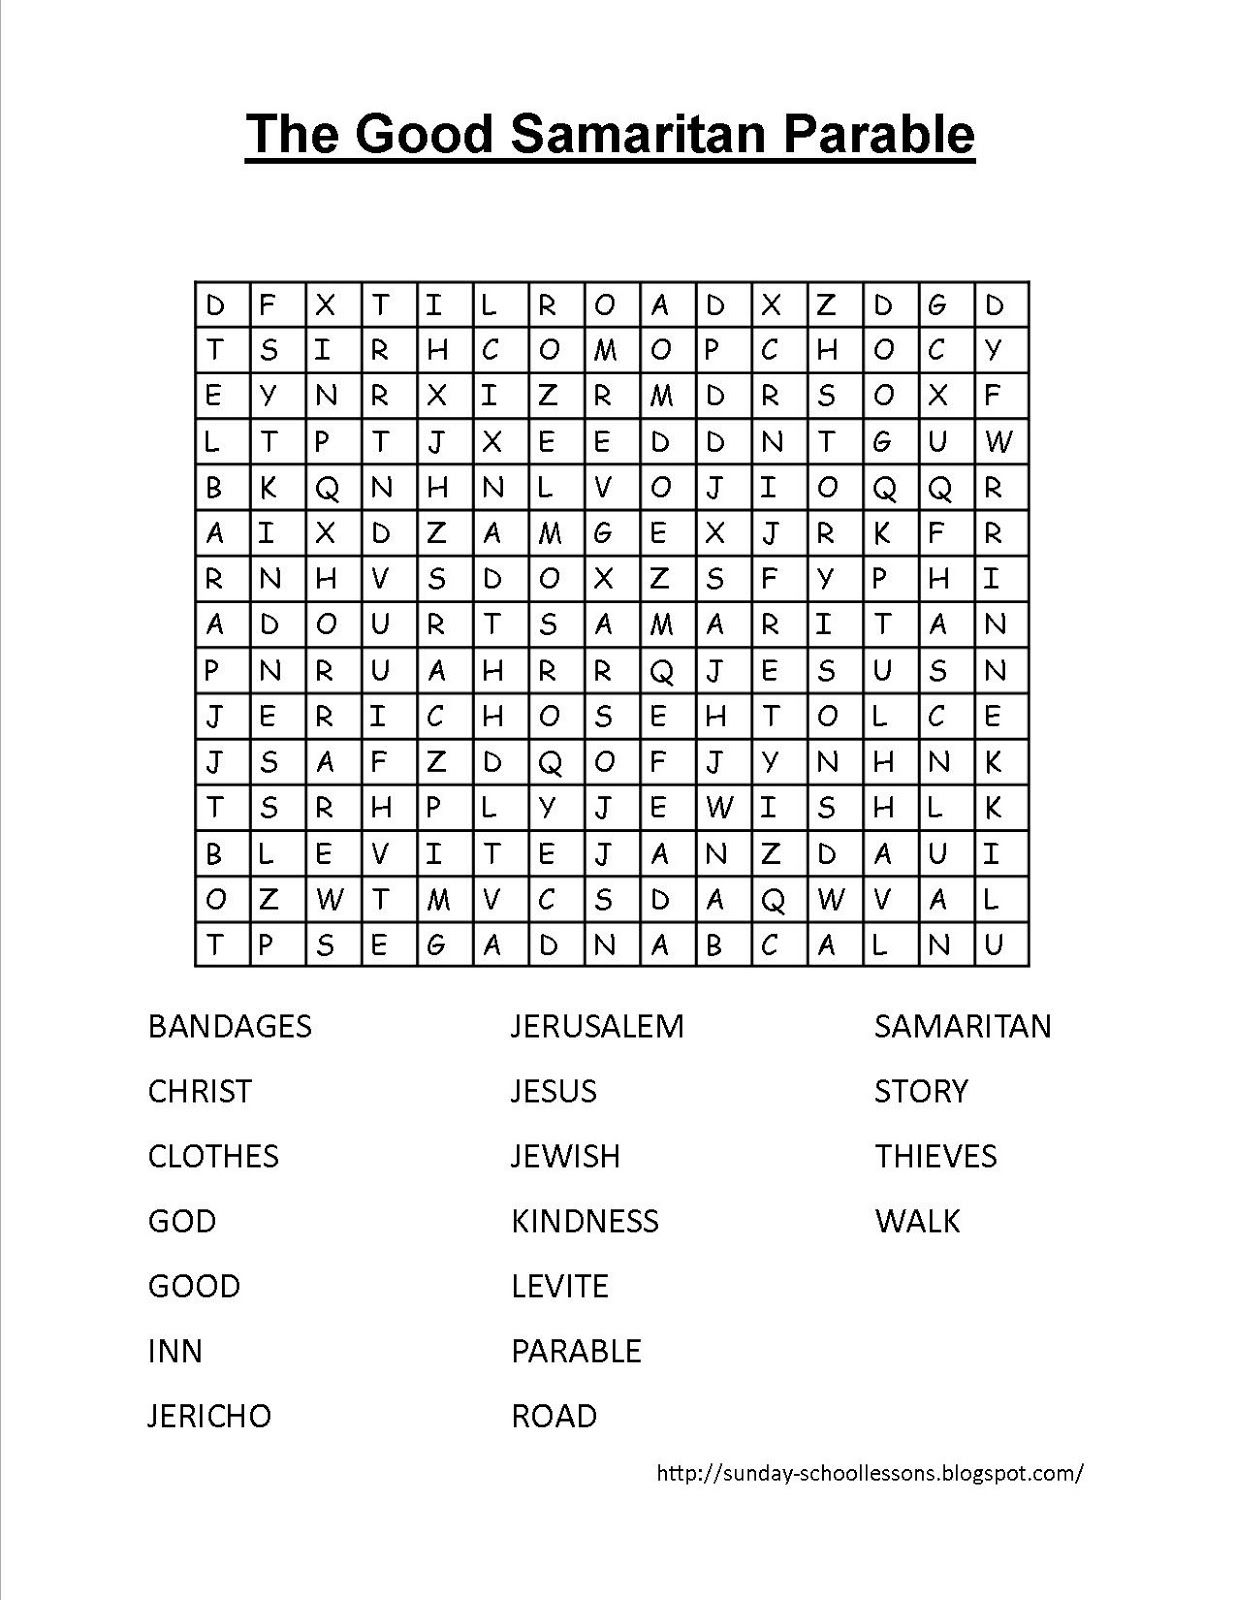 The Good Samaritan Crossword Puzzle (Free Printable) - Parables - Free Printable Sunday School Lessons For Kids